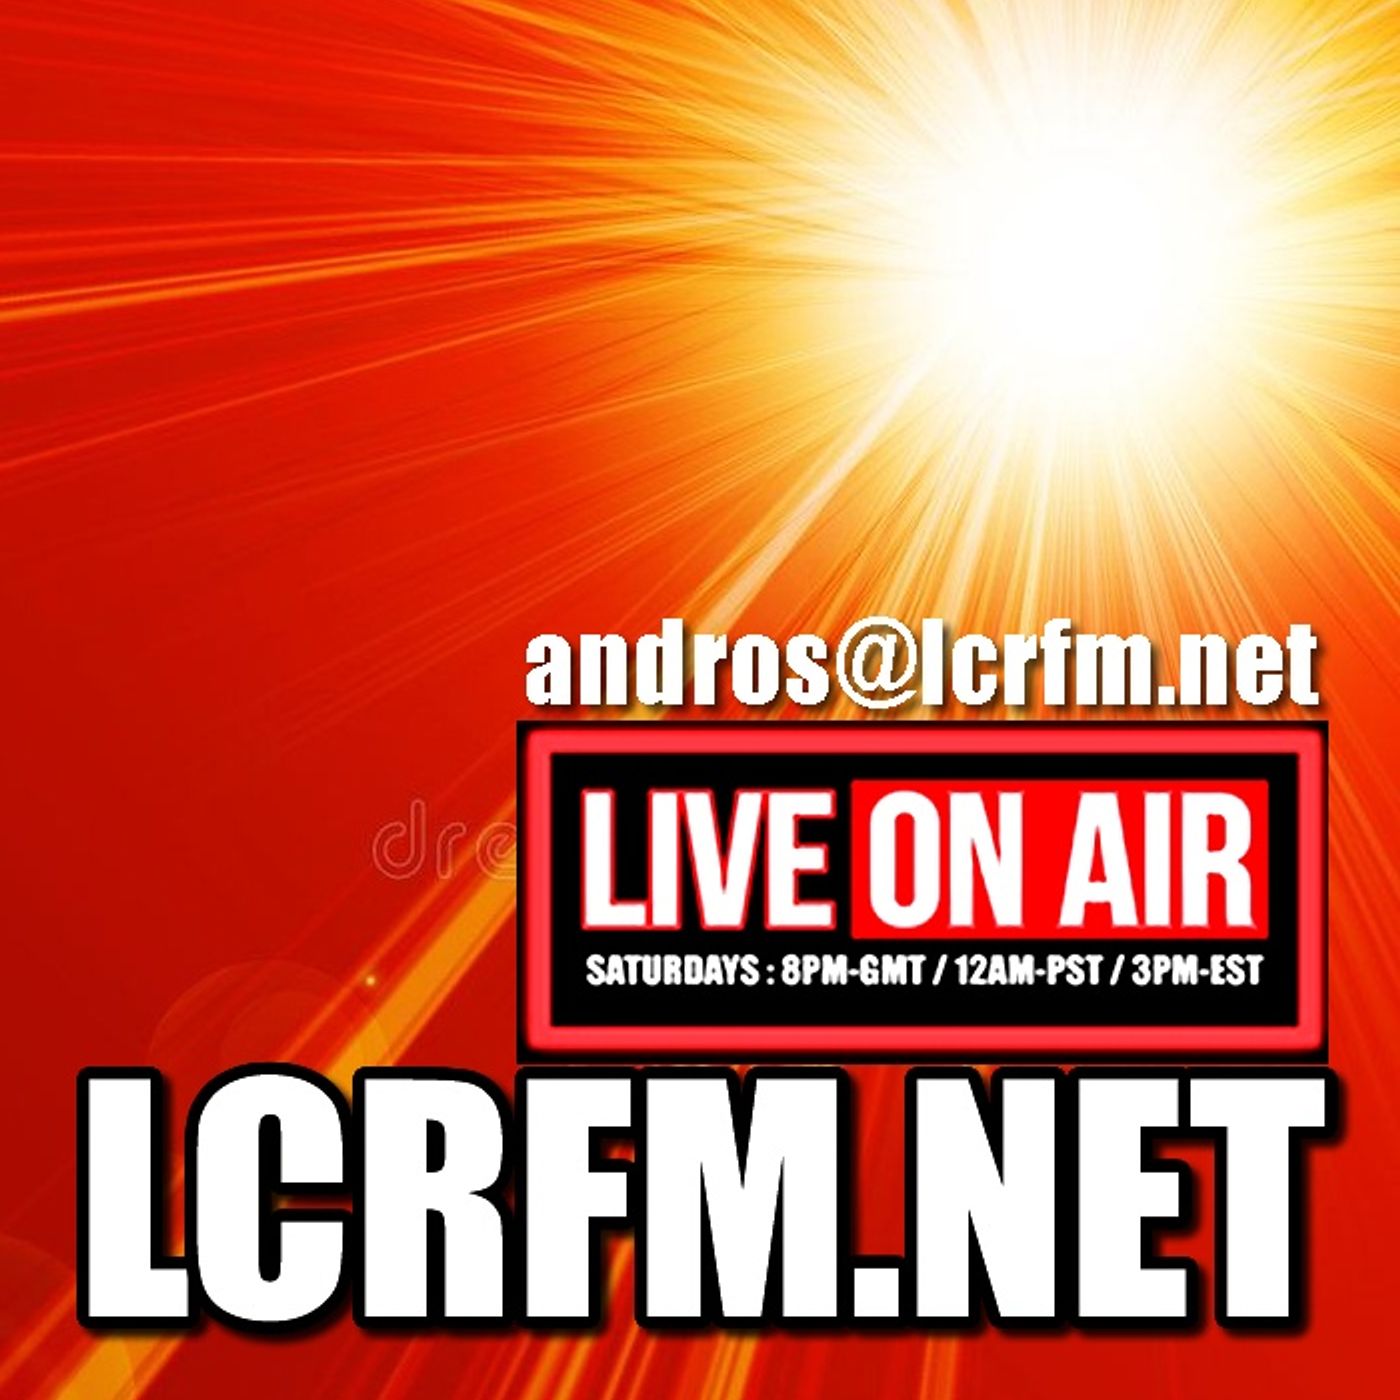 " HOTTER THAN IBIZA" LCRFM 8PM GMT LIVE  FROM LONDON